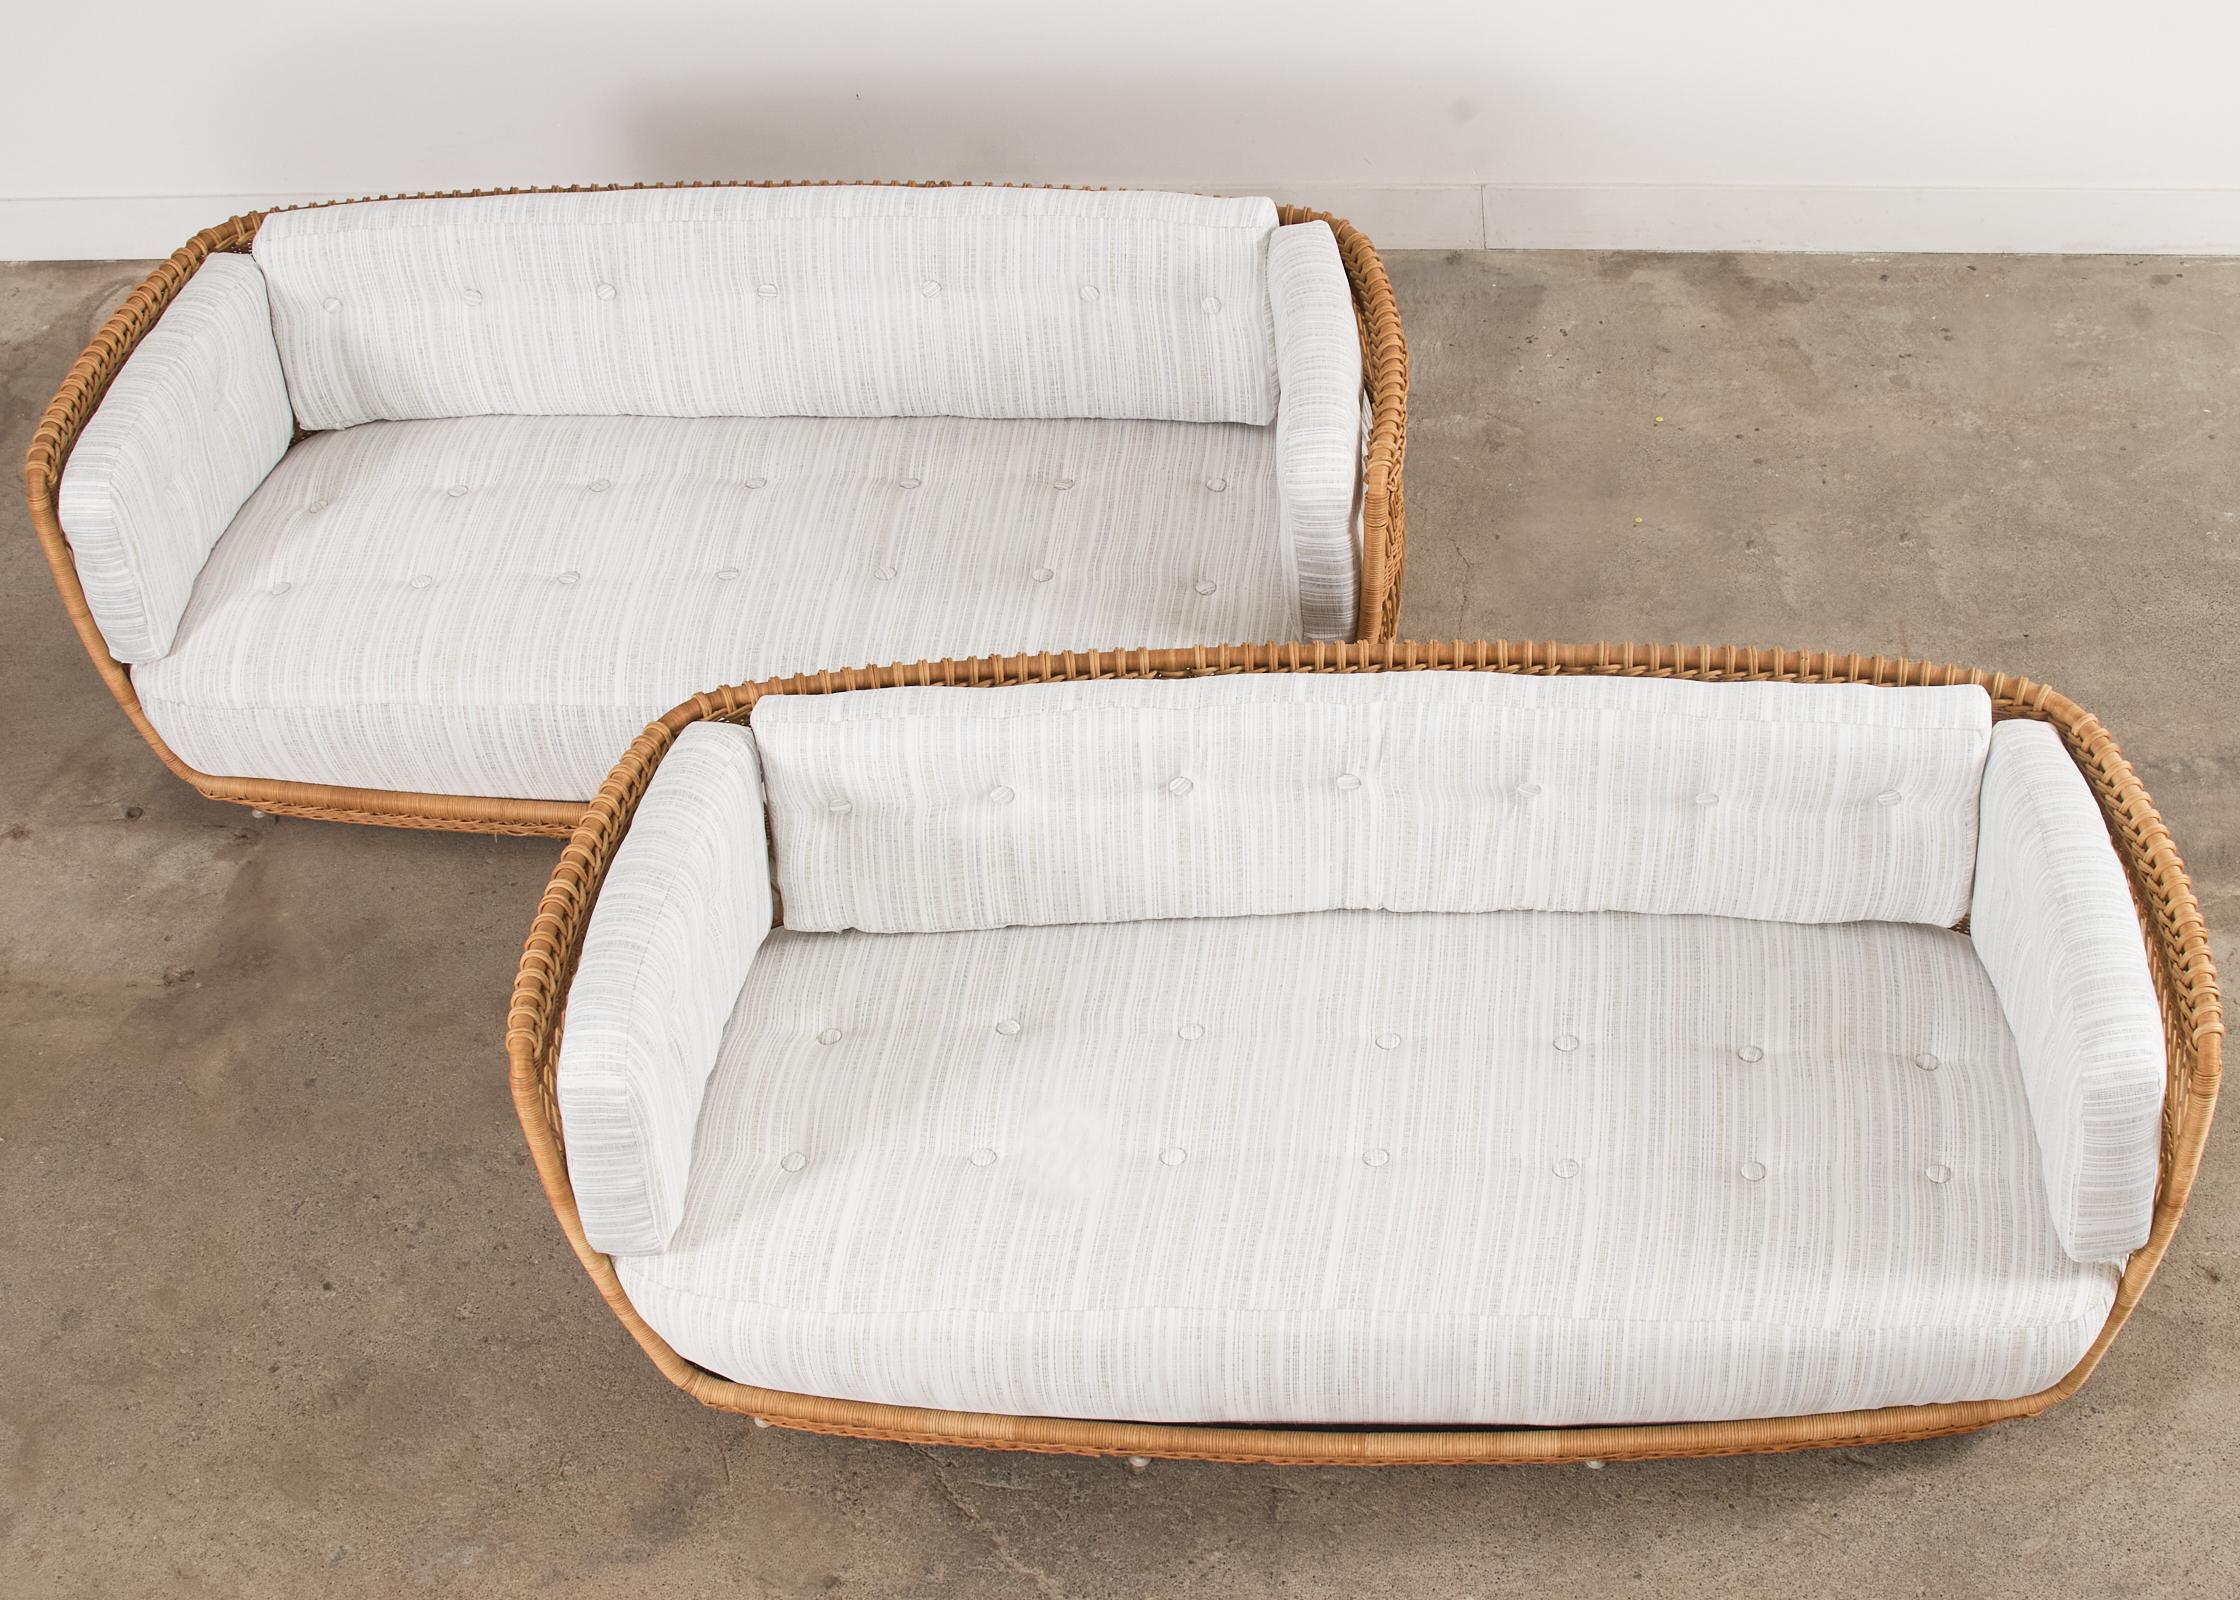 Pair of Organic Modern Rattan Wicker Basket Sofa Settees In Good Condition For Sale In Rio Vista, CA